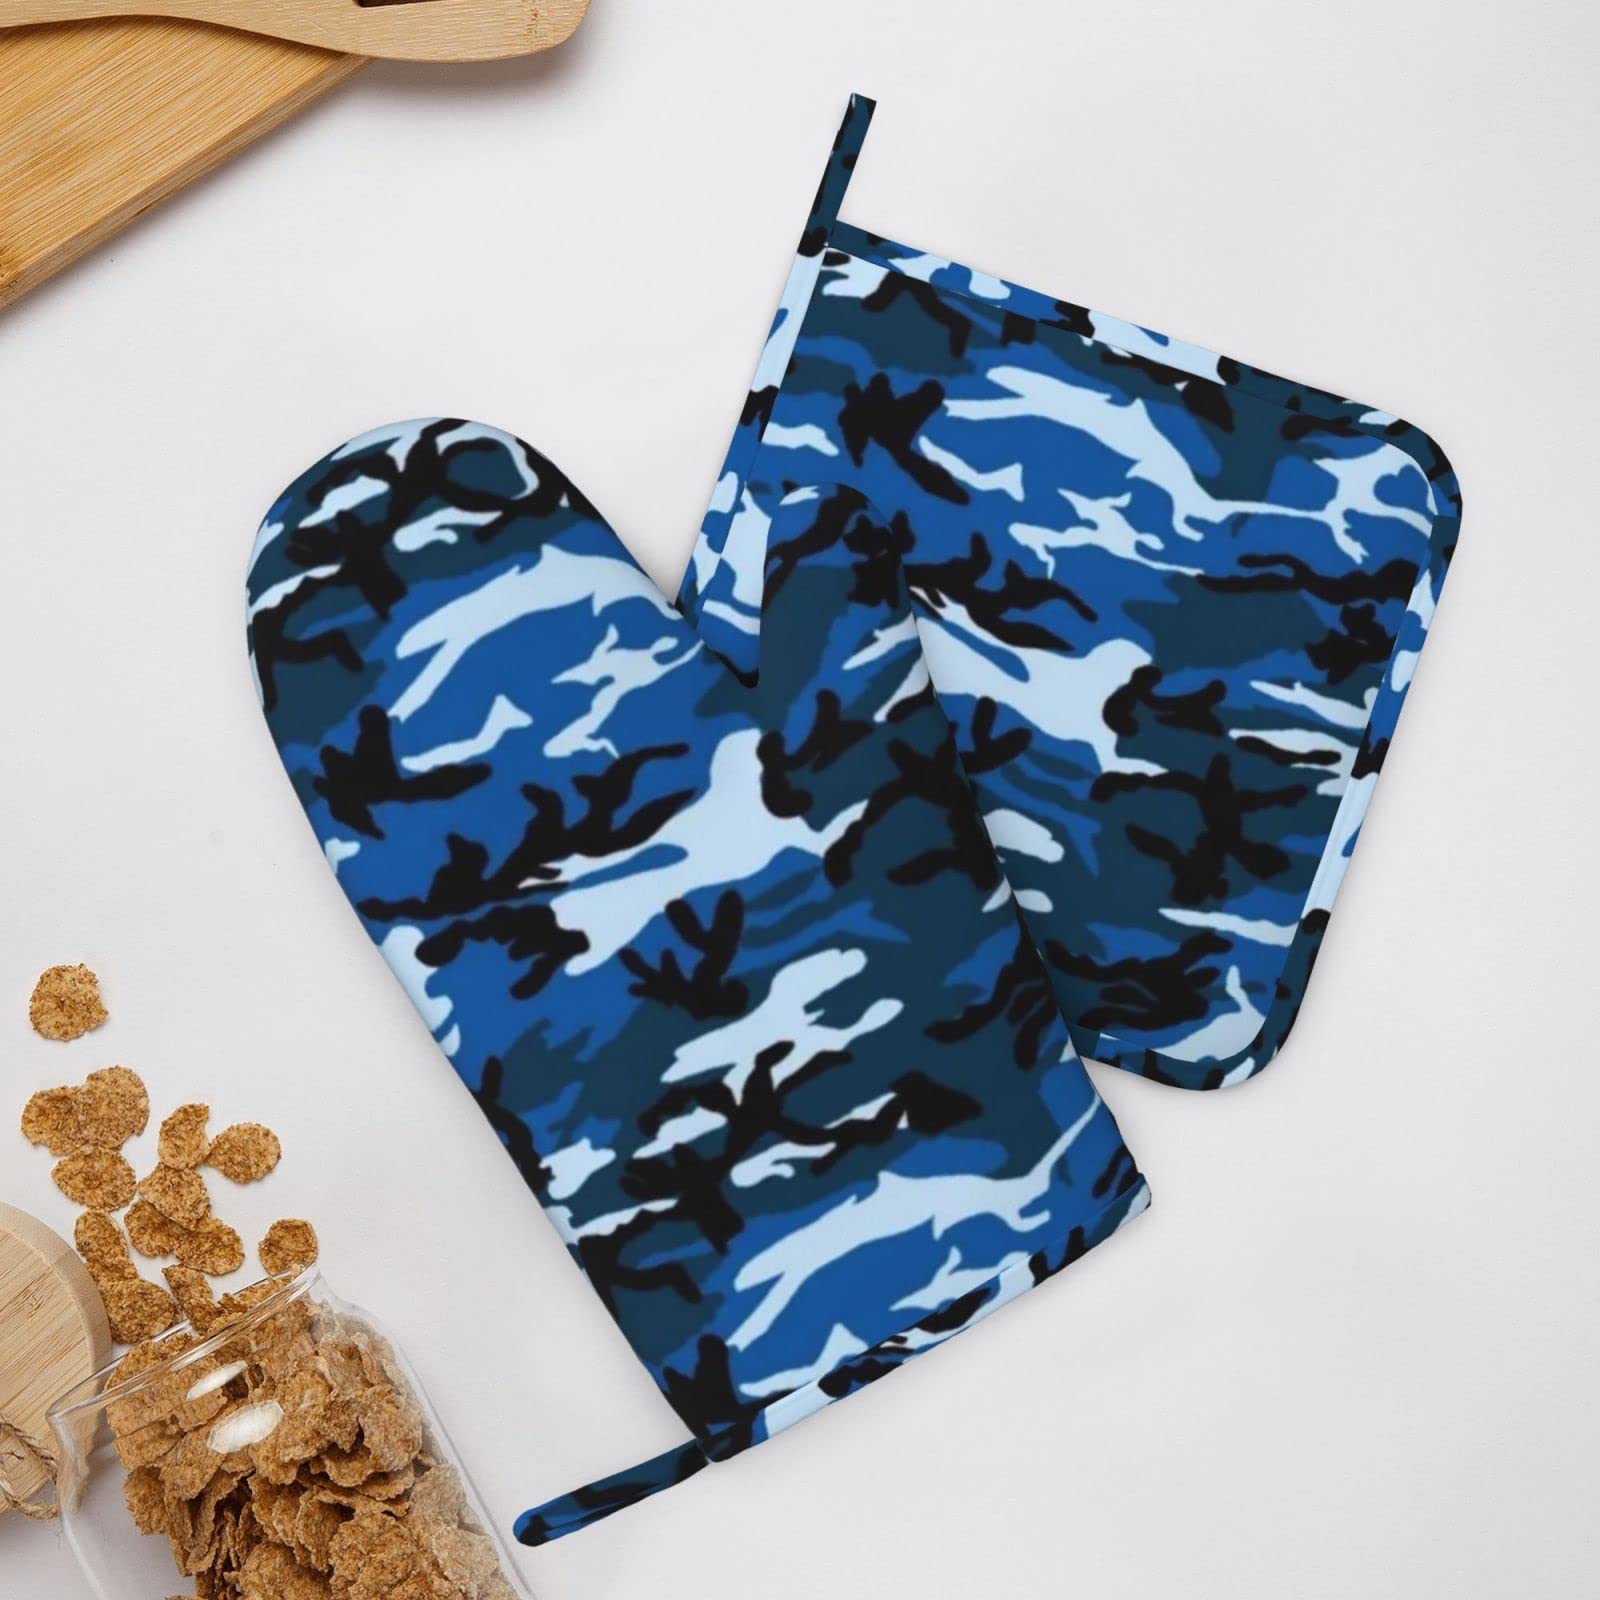 Blue Camo Silicone Oven Mitts Pot Holder Sets 2pcs Cute Design Washable Non Slip Kitchen Heat Resistant Mat Women's Cooking Gloves for Baking and BBQ Wear